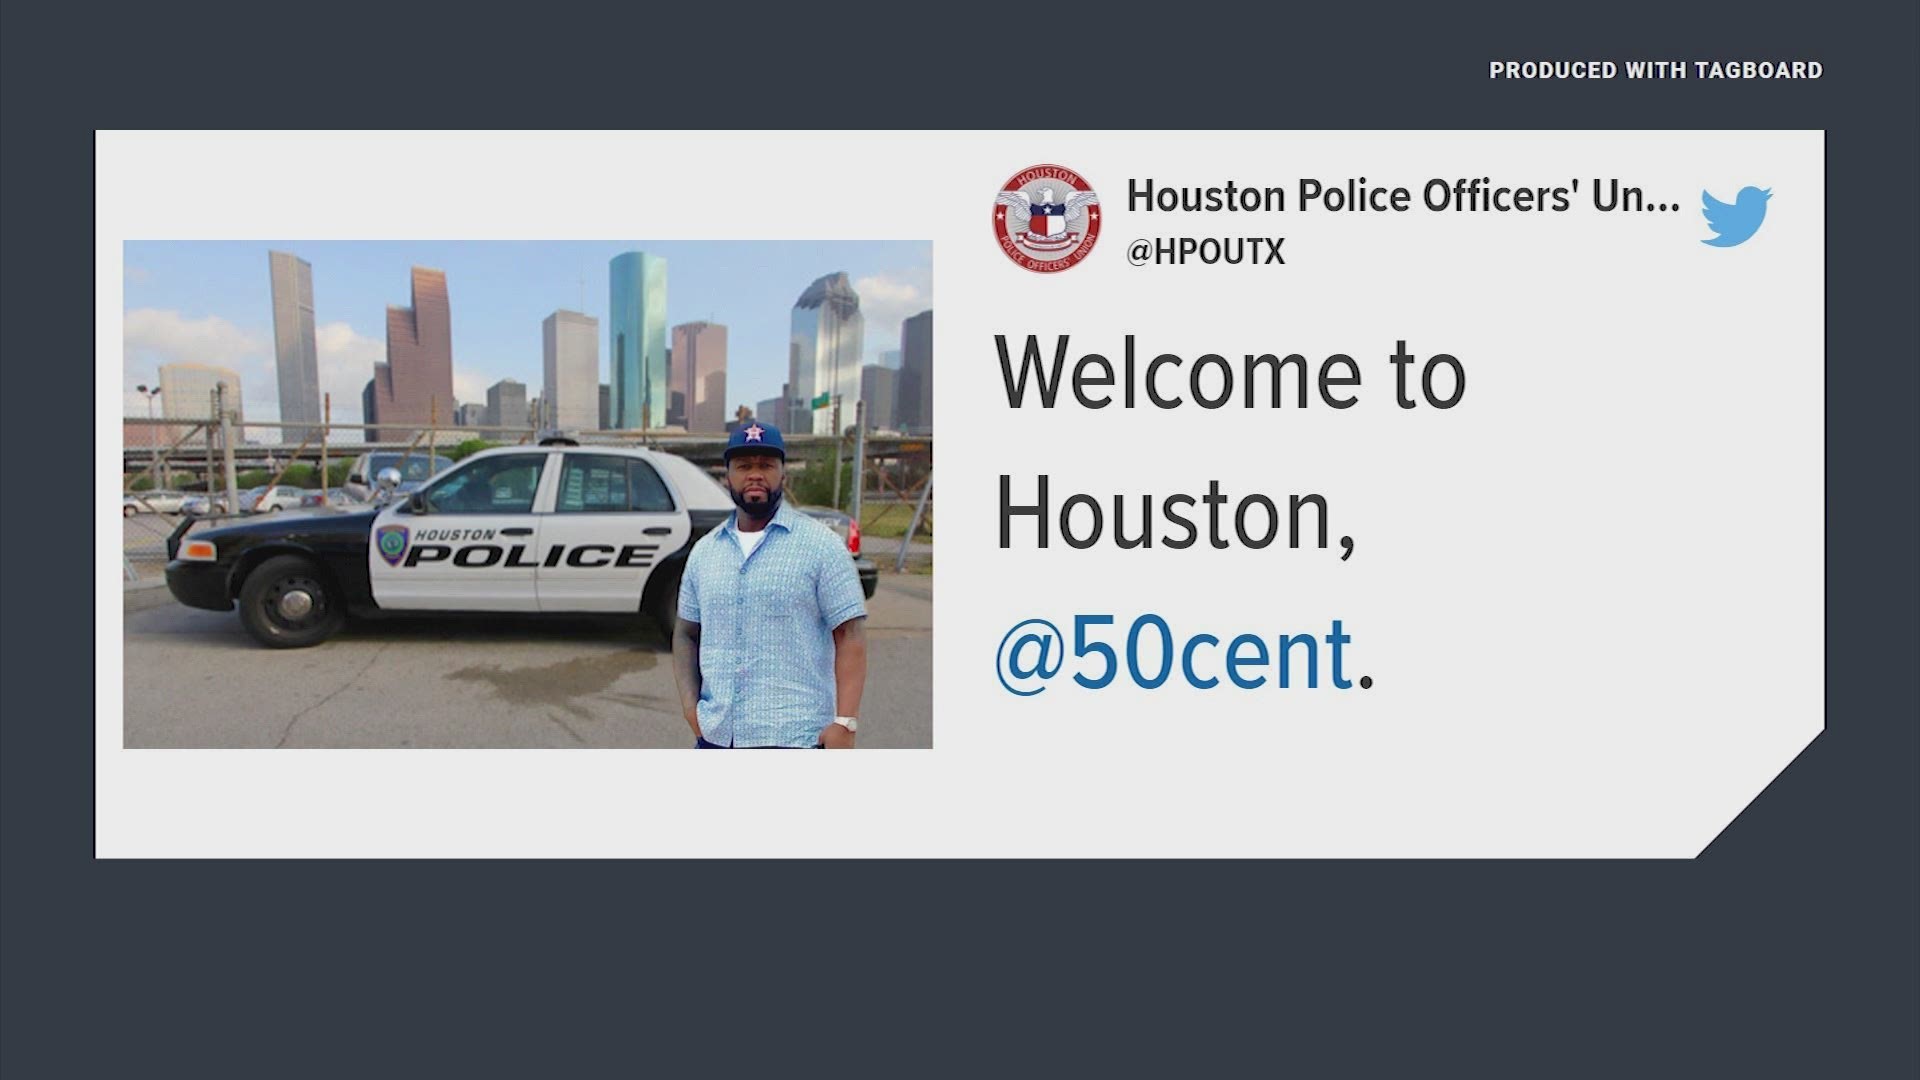 50 Cent recently announced he moved to Houston, and social media had fun putting him in front of different city landmarks.